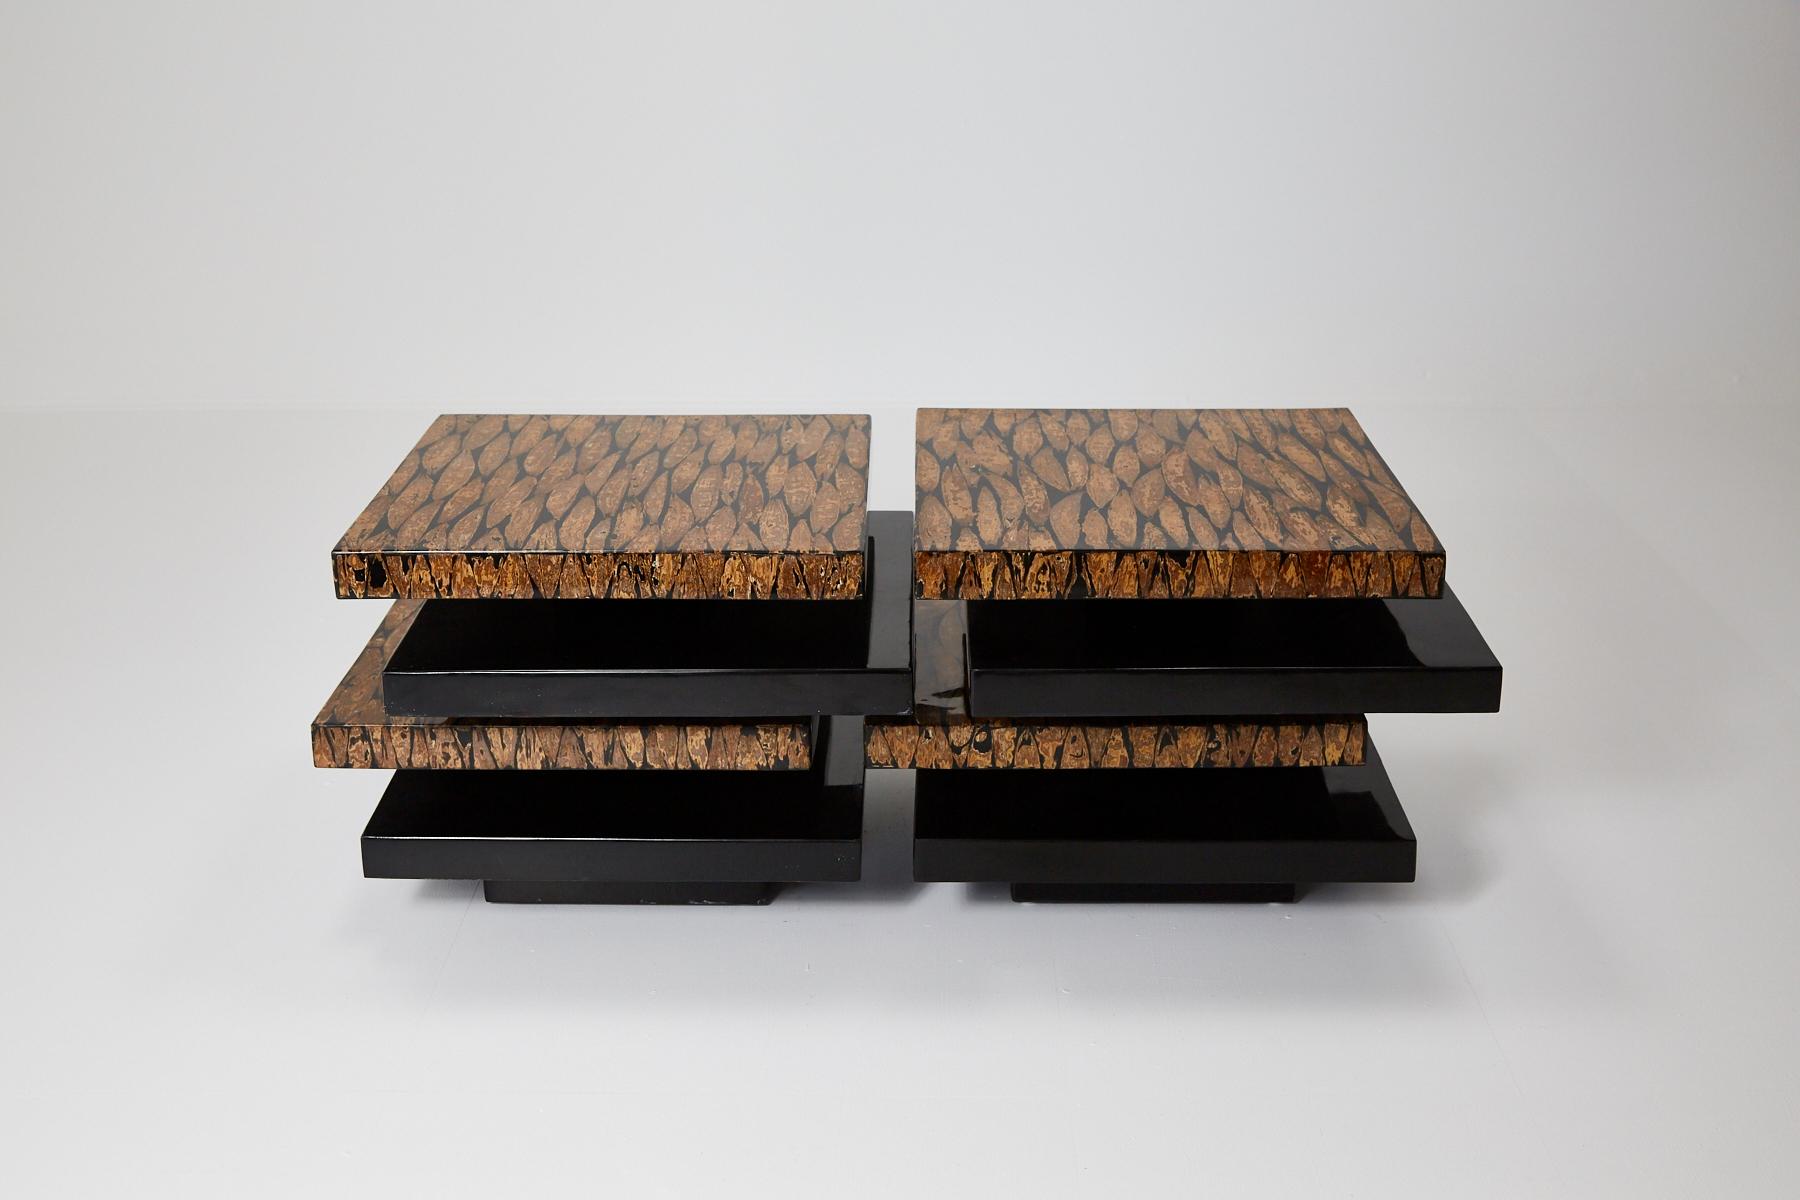 Contemporary lacquered coffee table comprised of stacked rectangular forms, alternating between plain black gloss and cotton husk inlay finishes. The table is in two parts and can be used together as a coffee table or separately as side